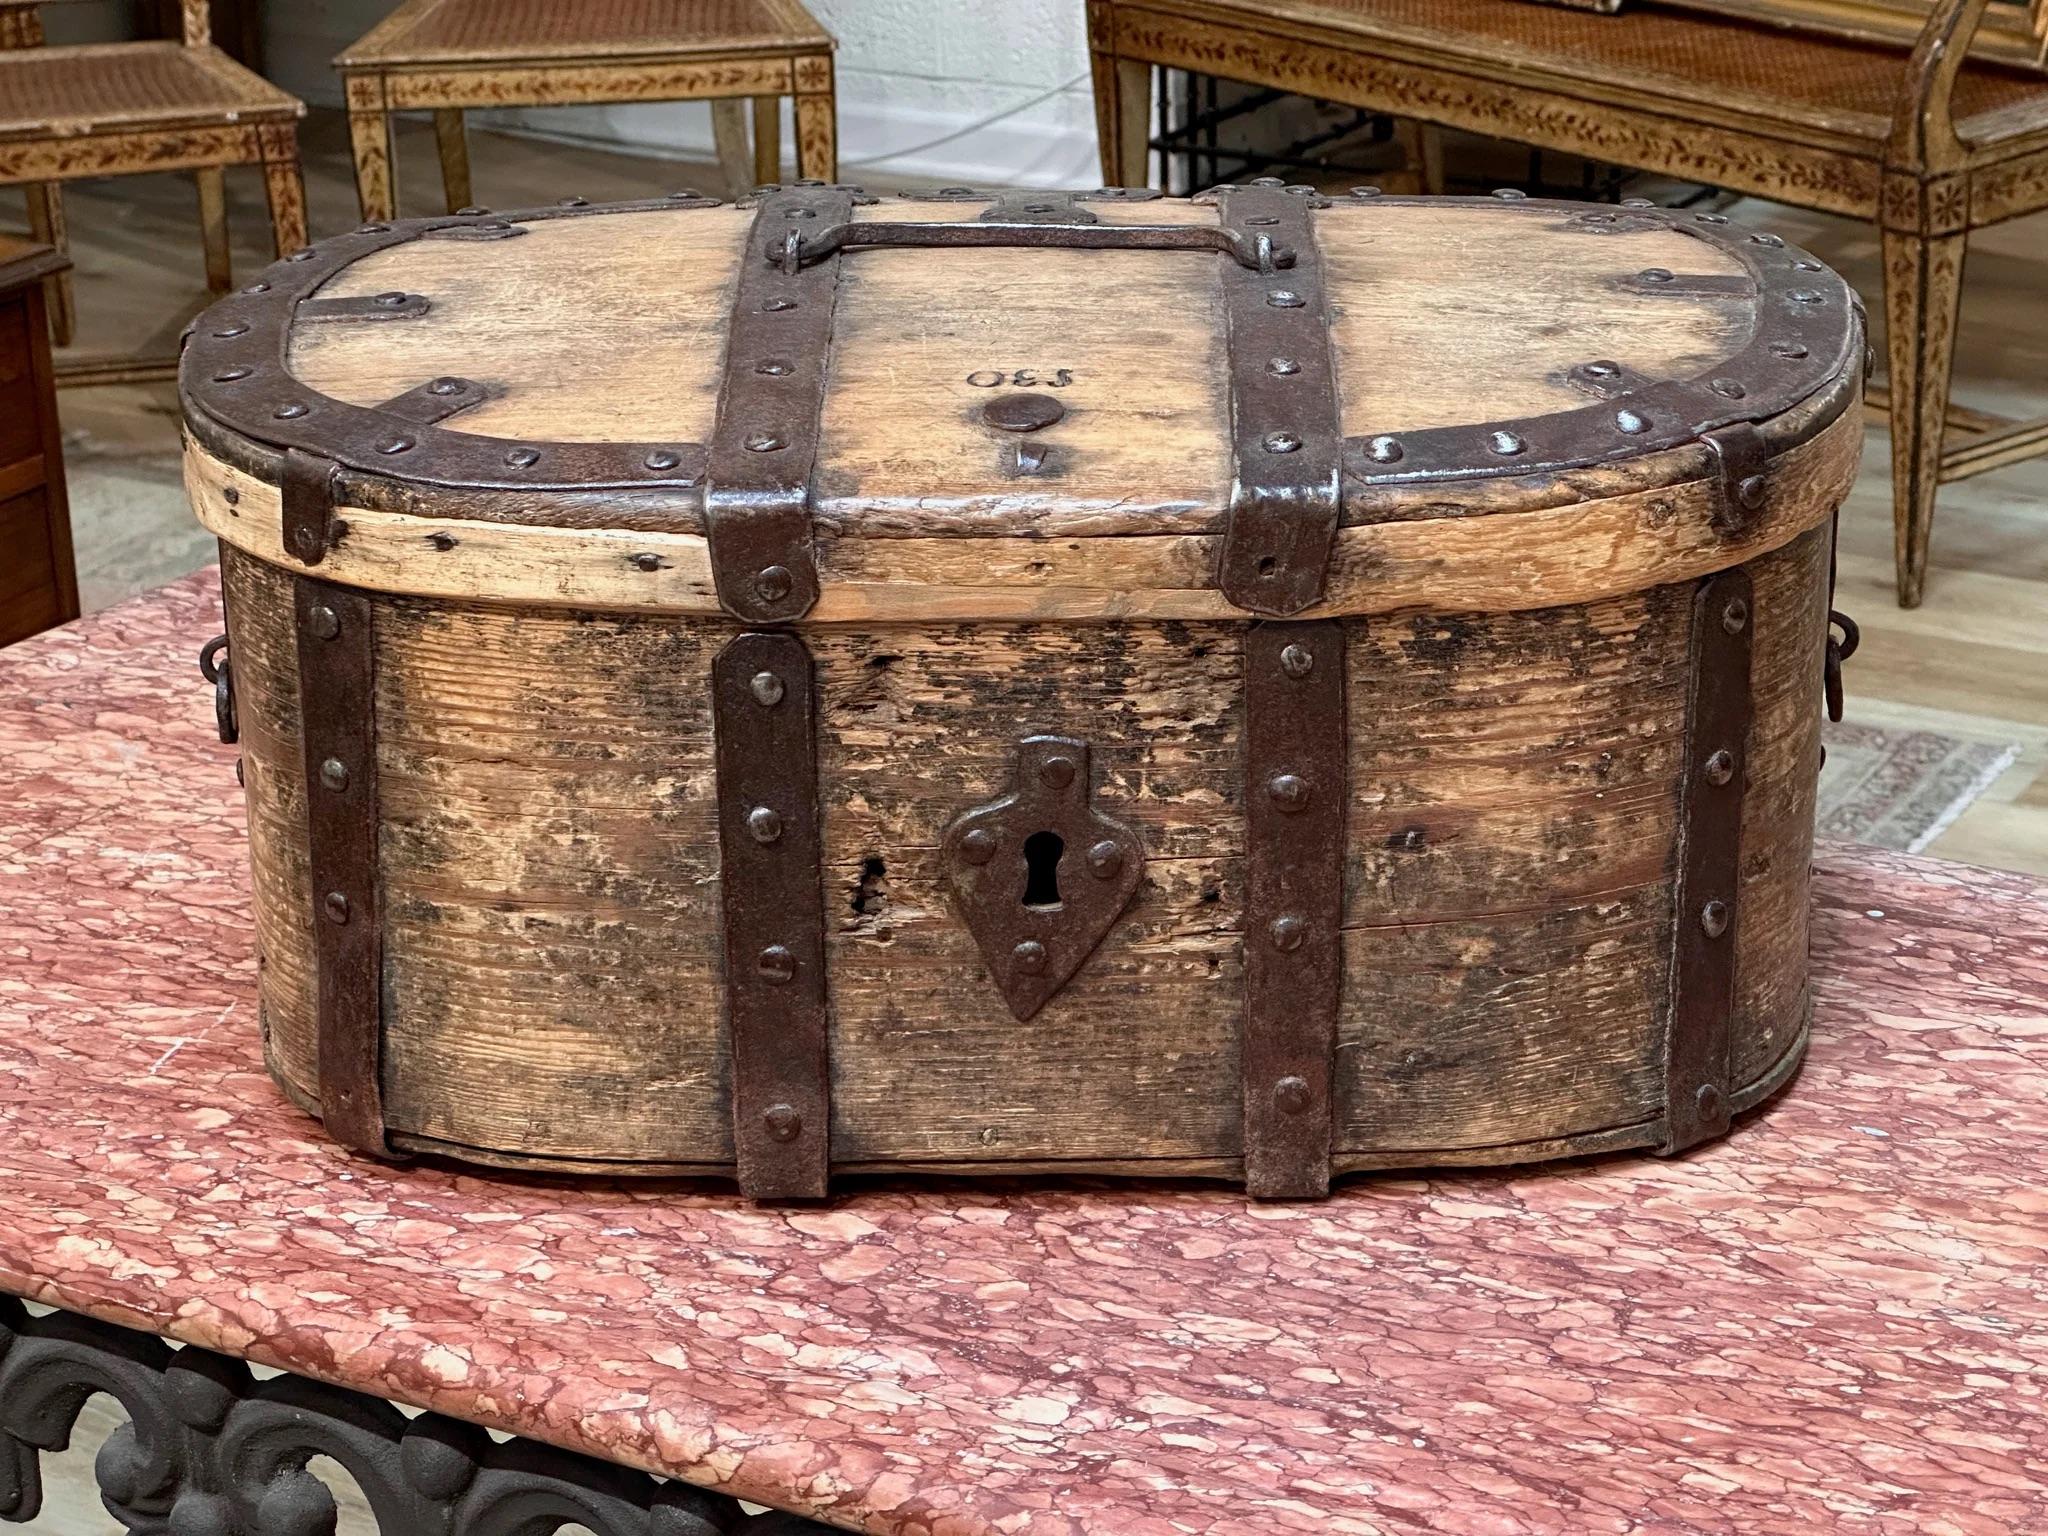 Eighteenth century Swedish Wedding Box. Rustic Swedish wooden box with iron accents and natural patina. Created in Sweden during the last decade of the 18th century.  9.25” h. x 21.25” w. x 15.75” d.
